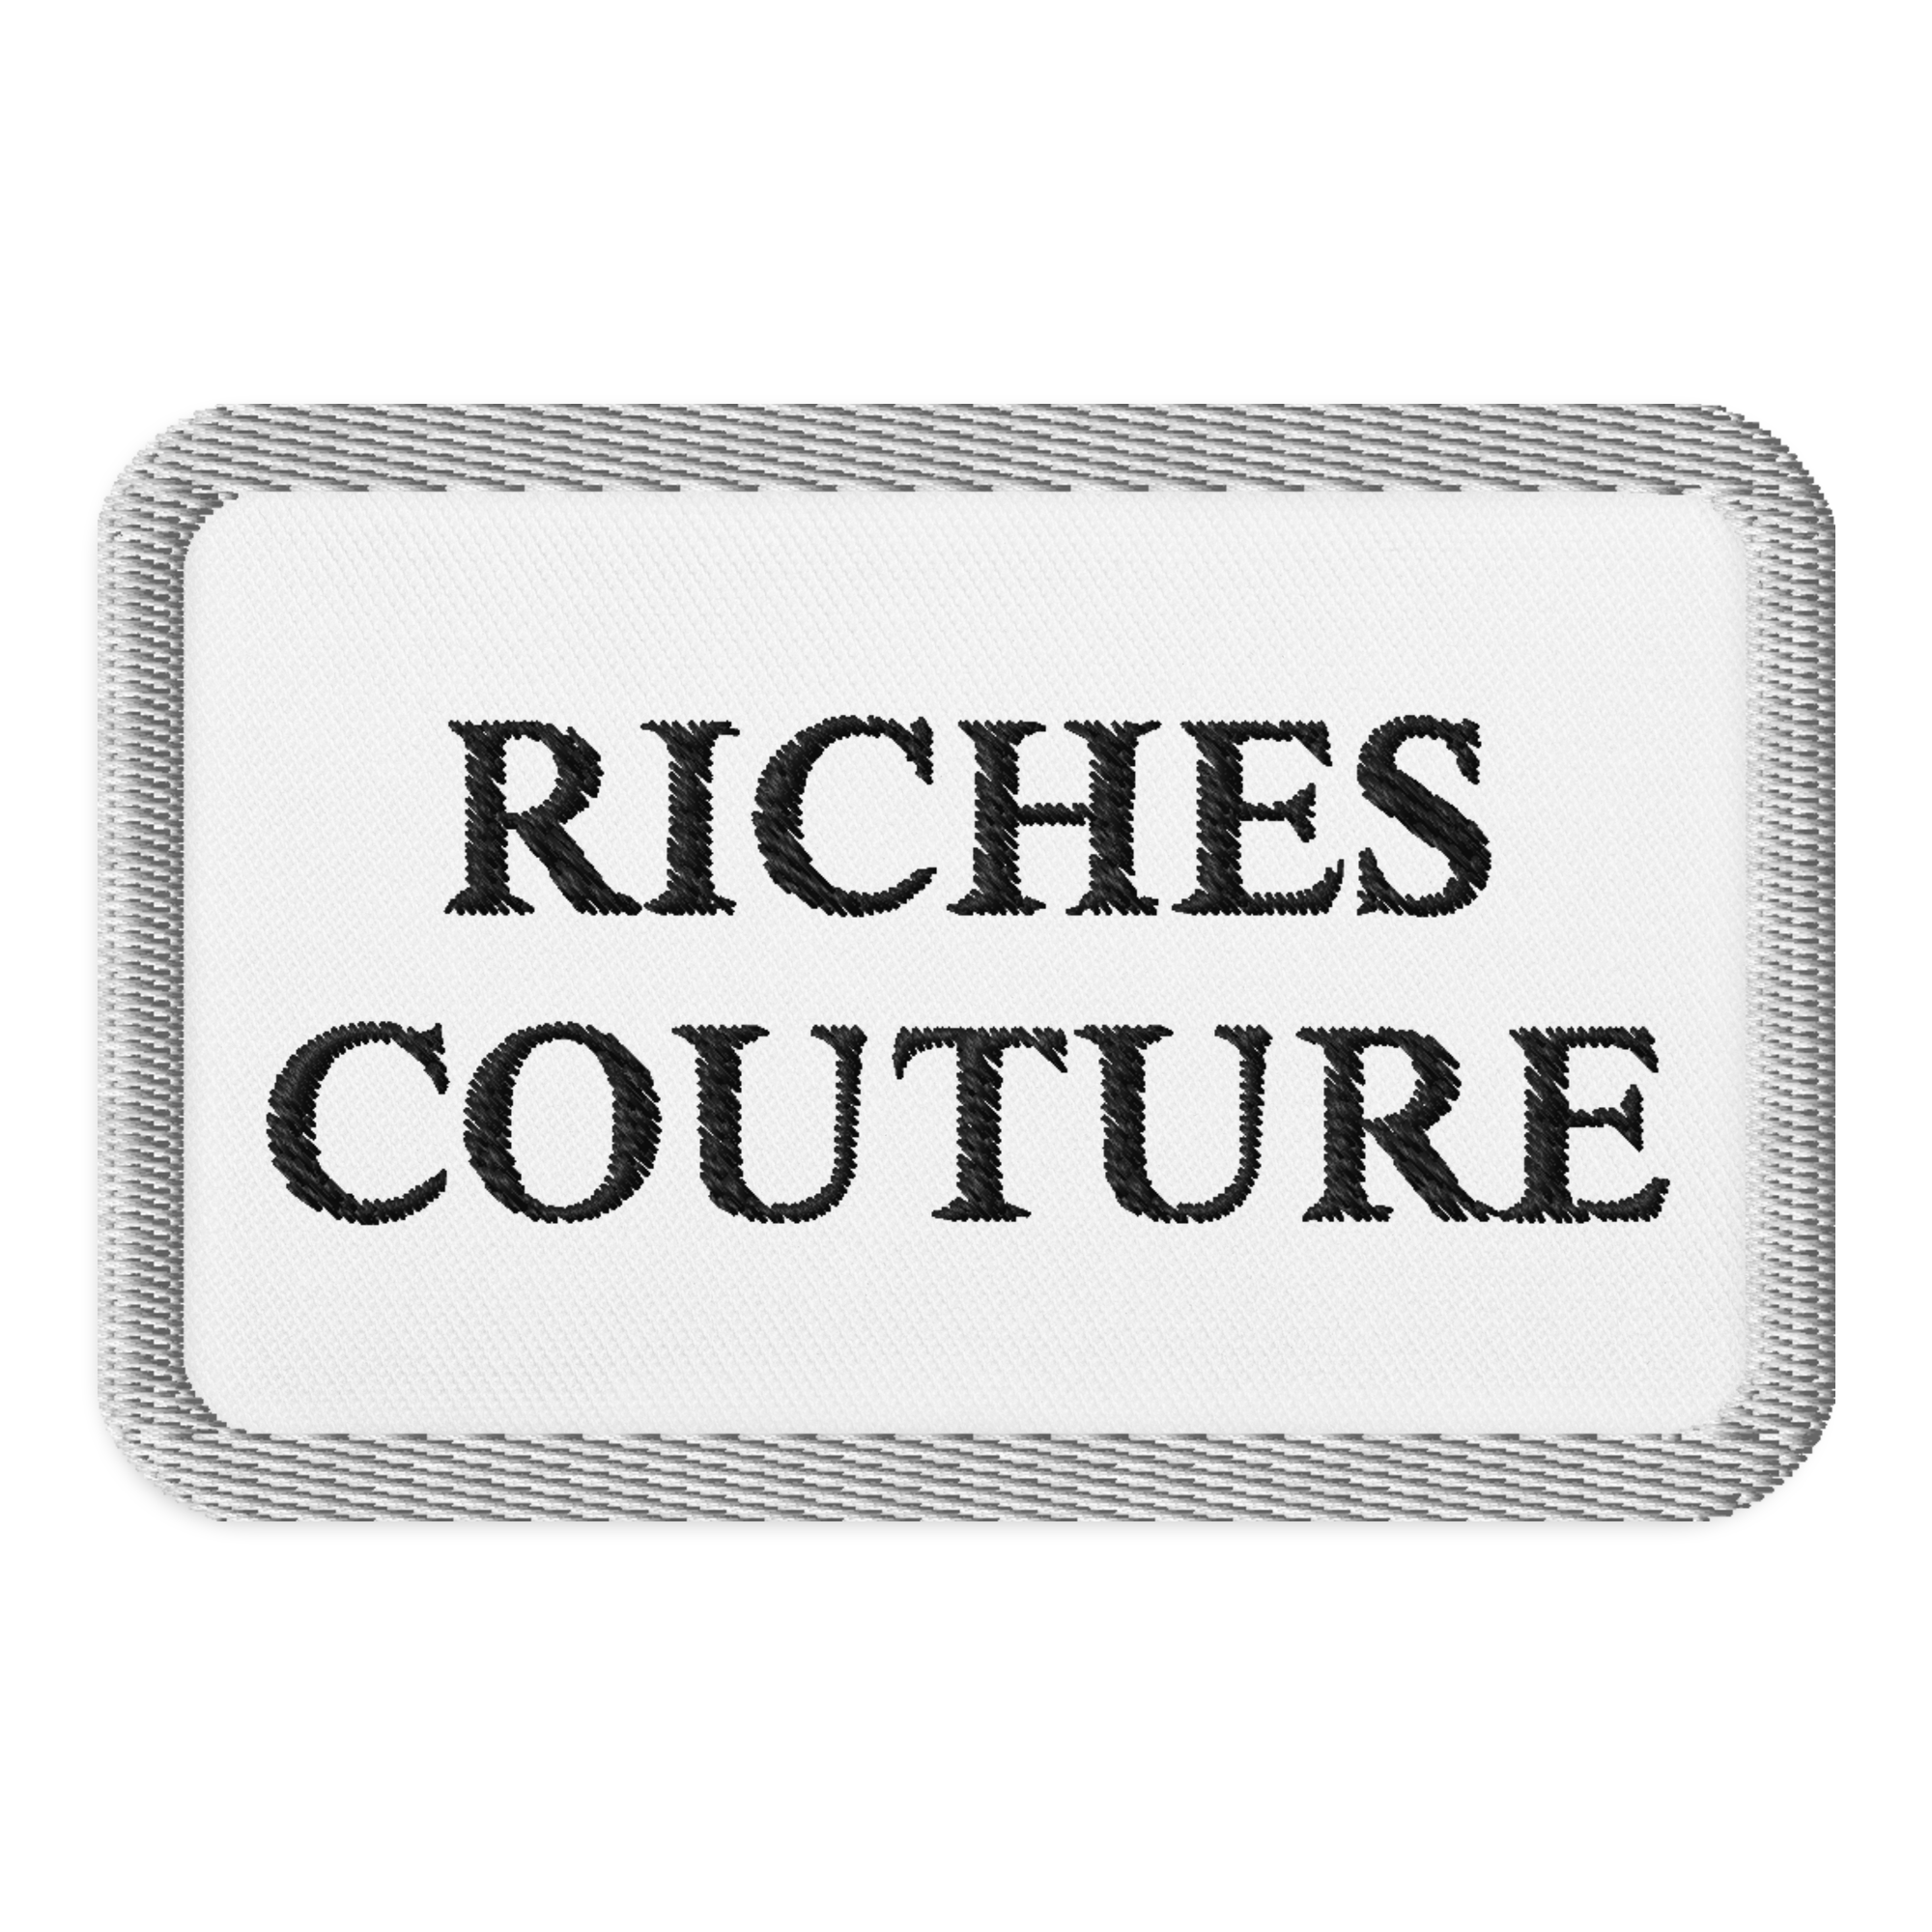 Riches Couture Embroidered Patches